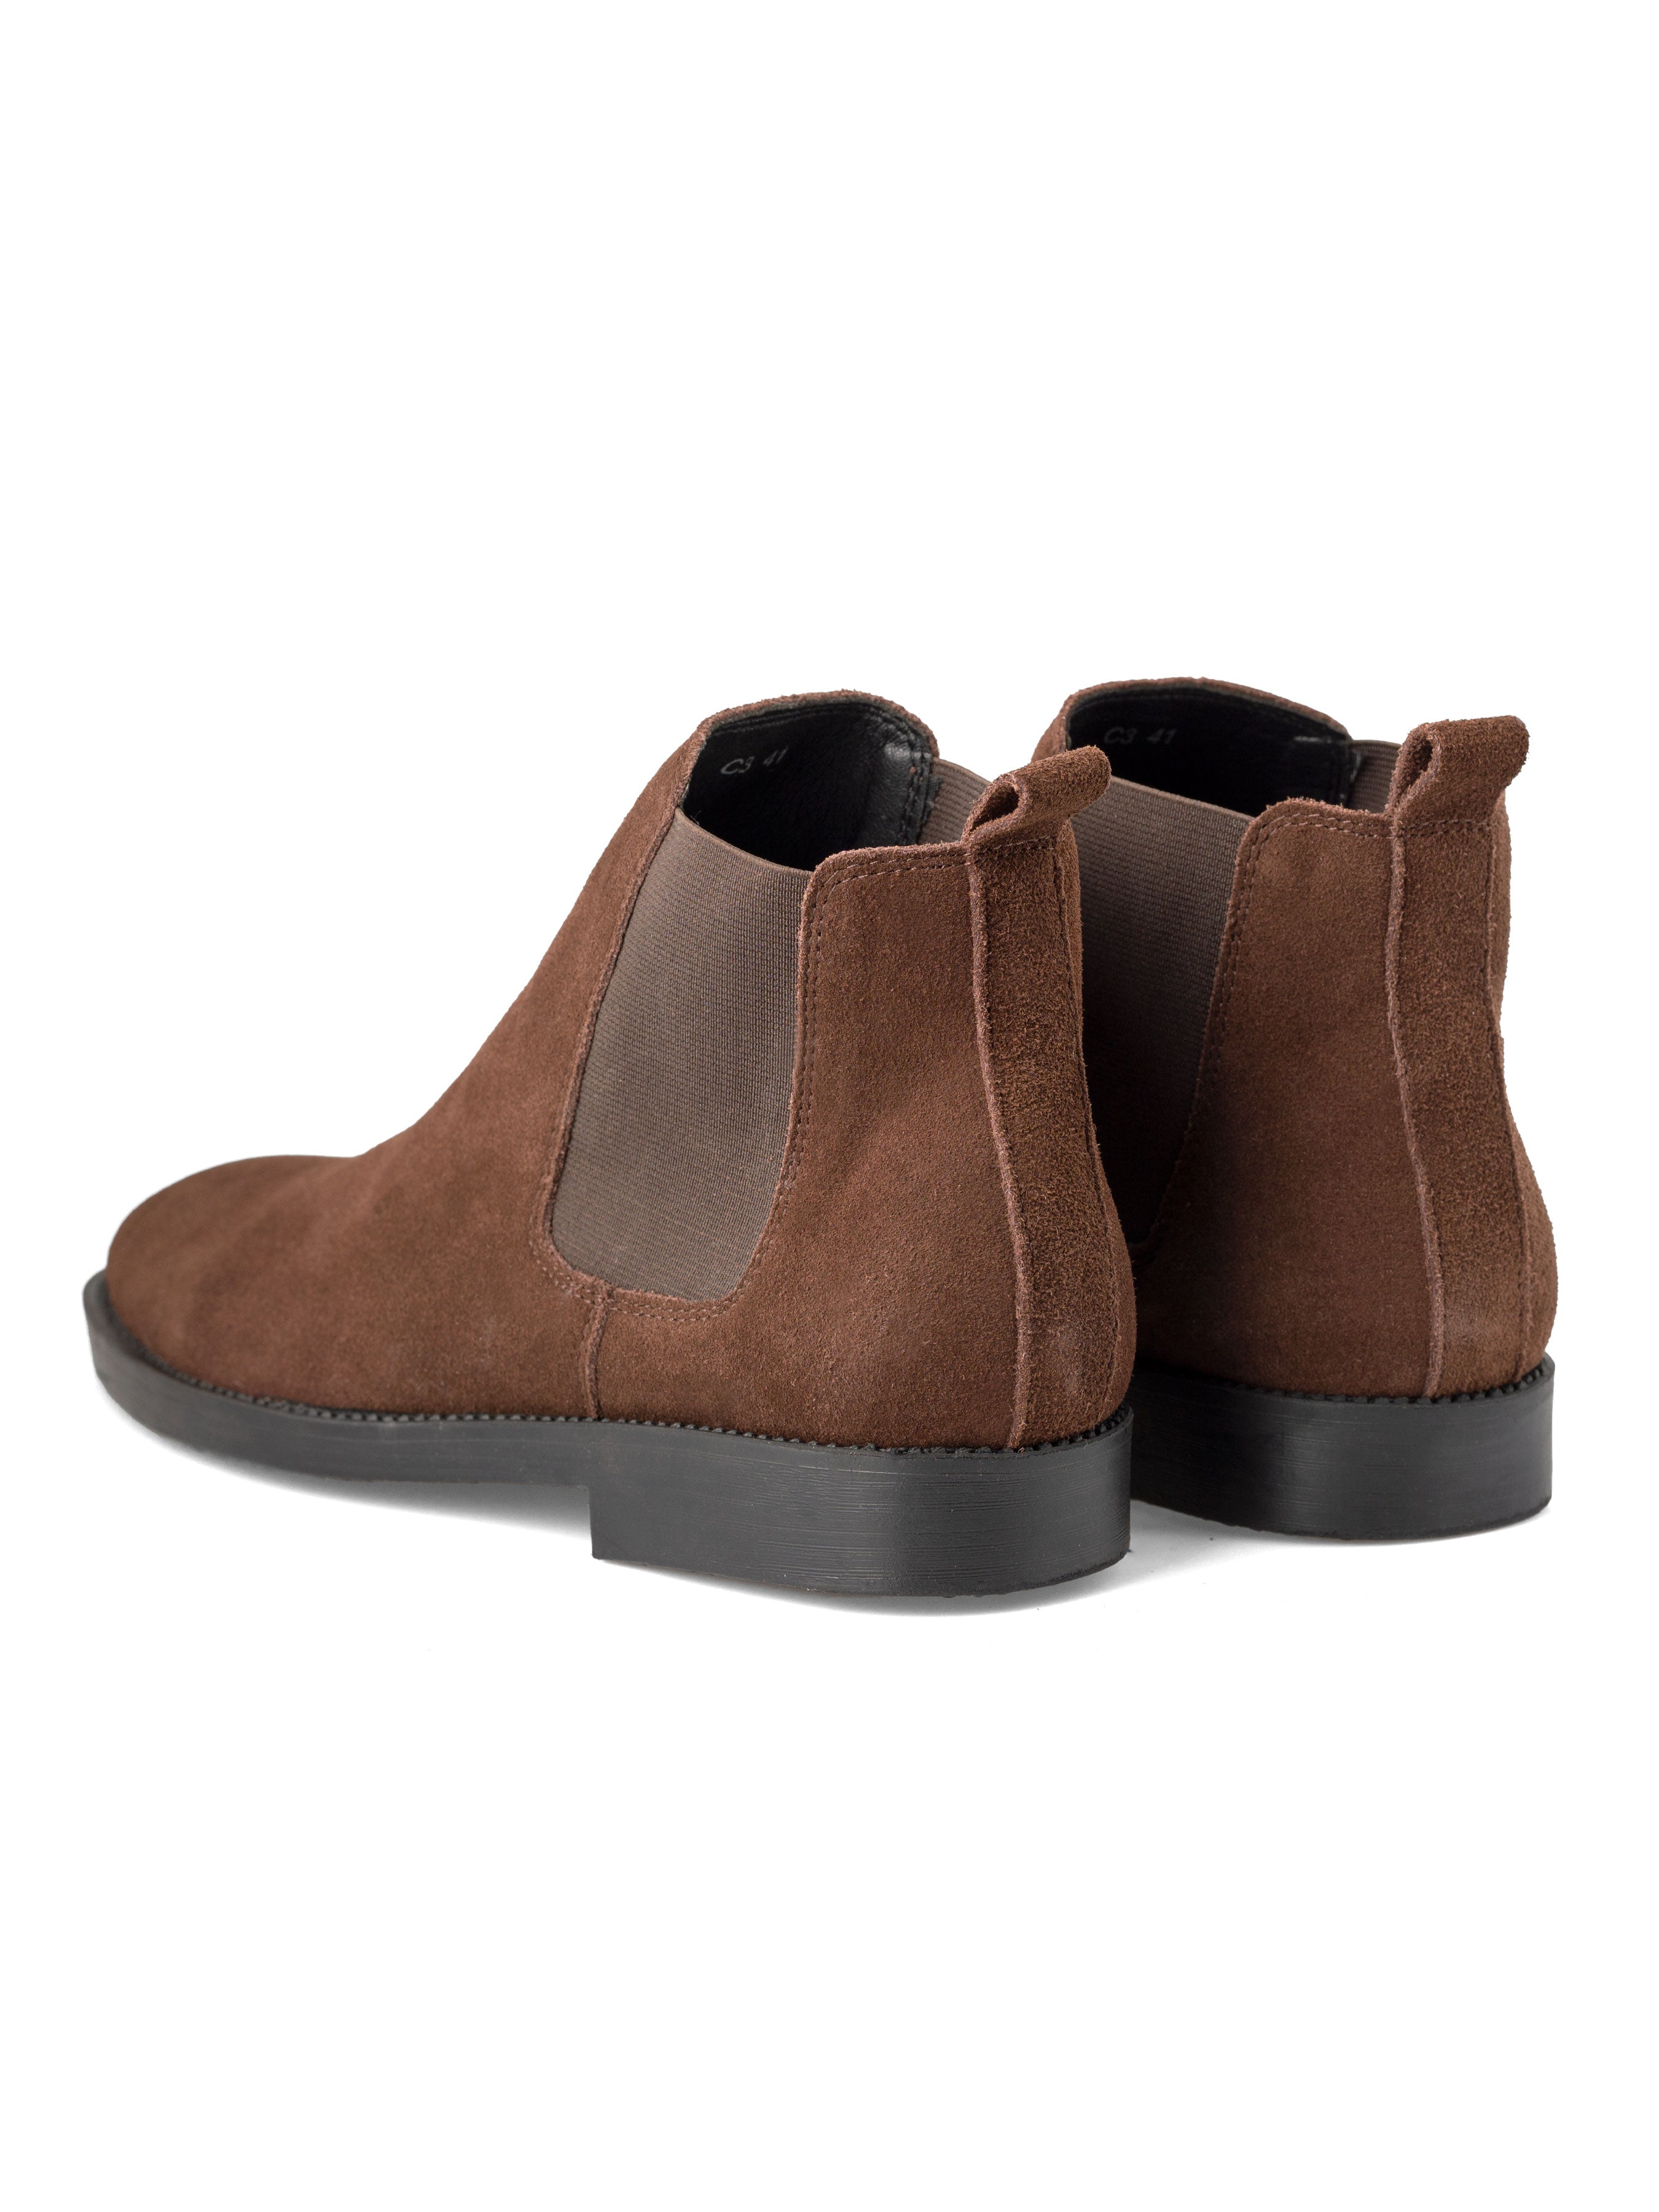 Chelsea Boots - Coffee Suede Leather (Crepe Sole) - Zeve Shoes